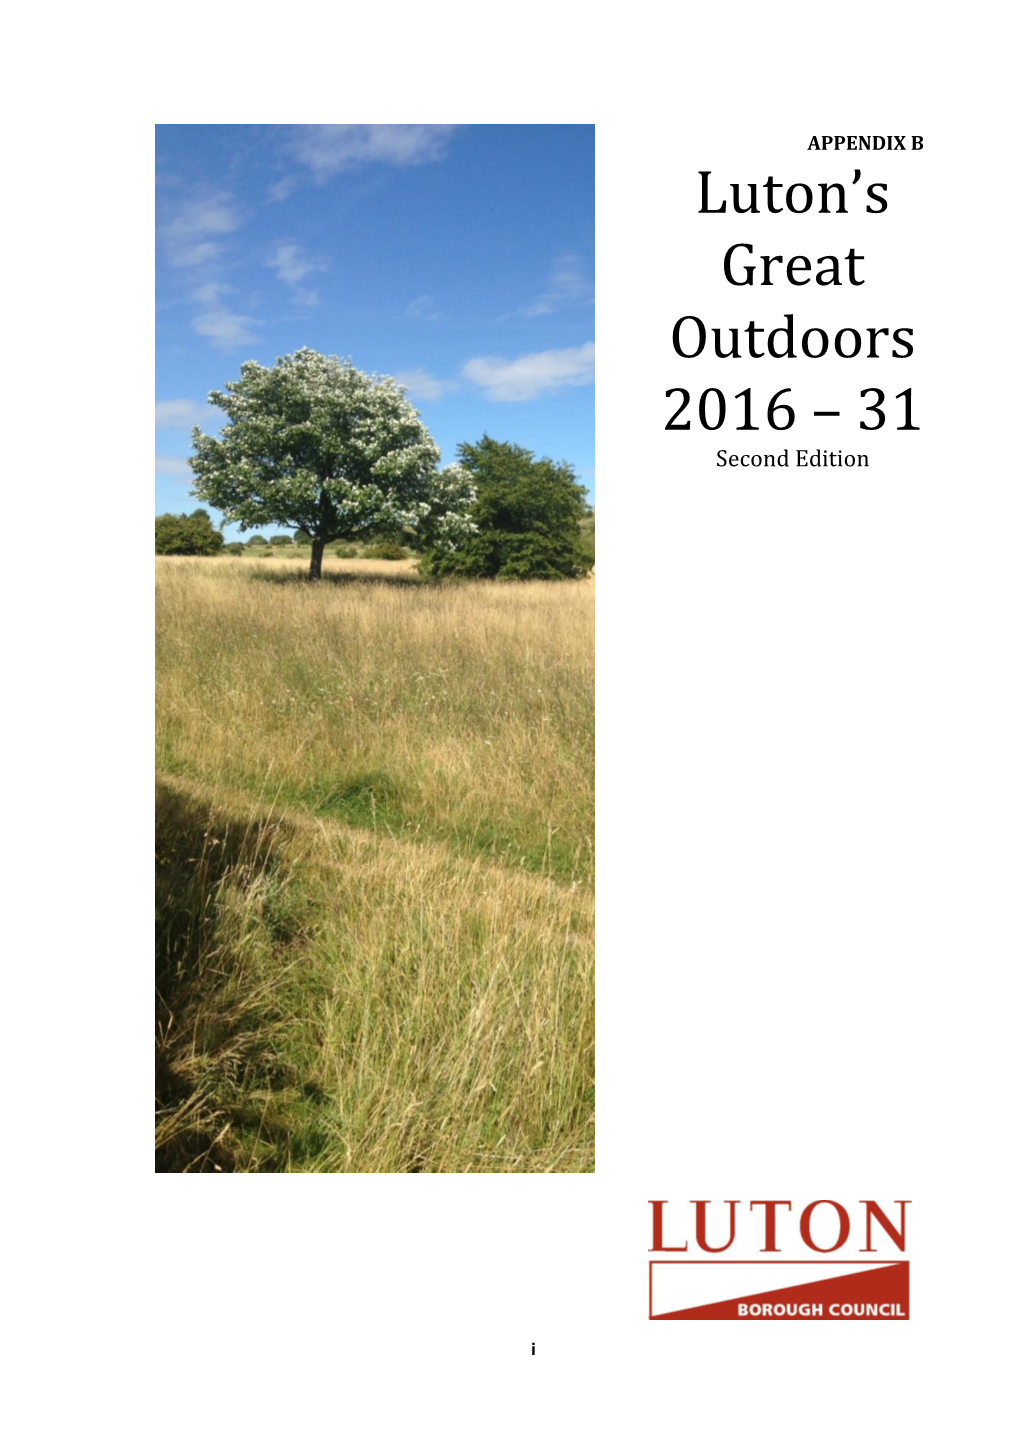 Luton's Great Outdoors 2016